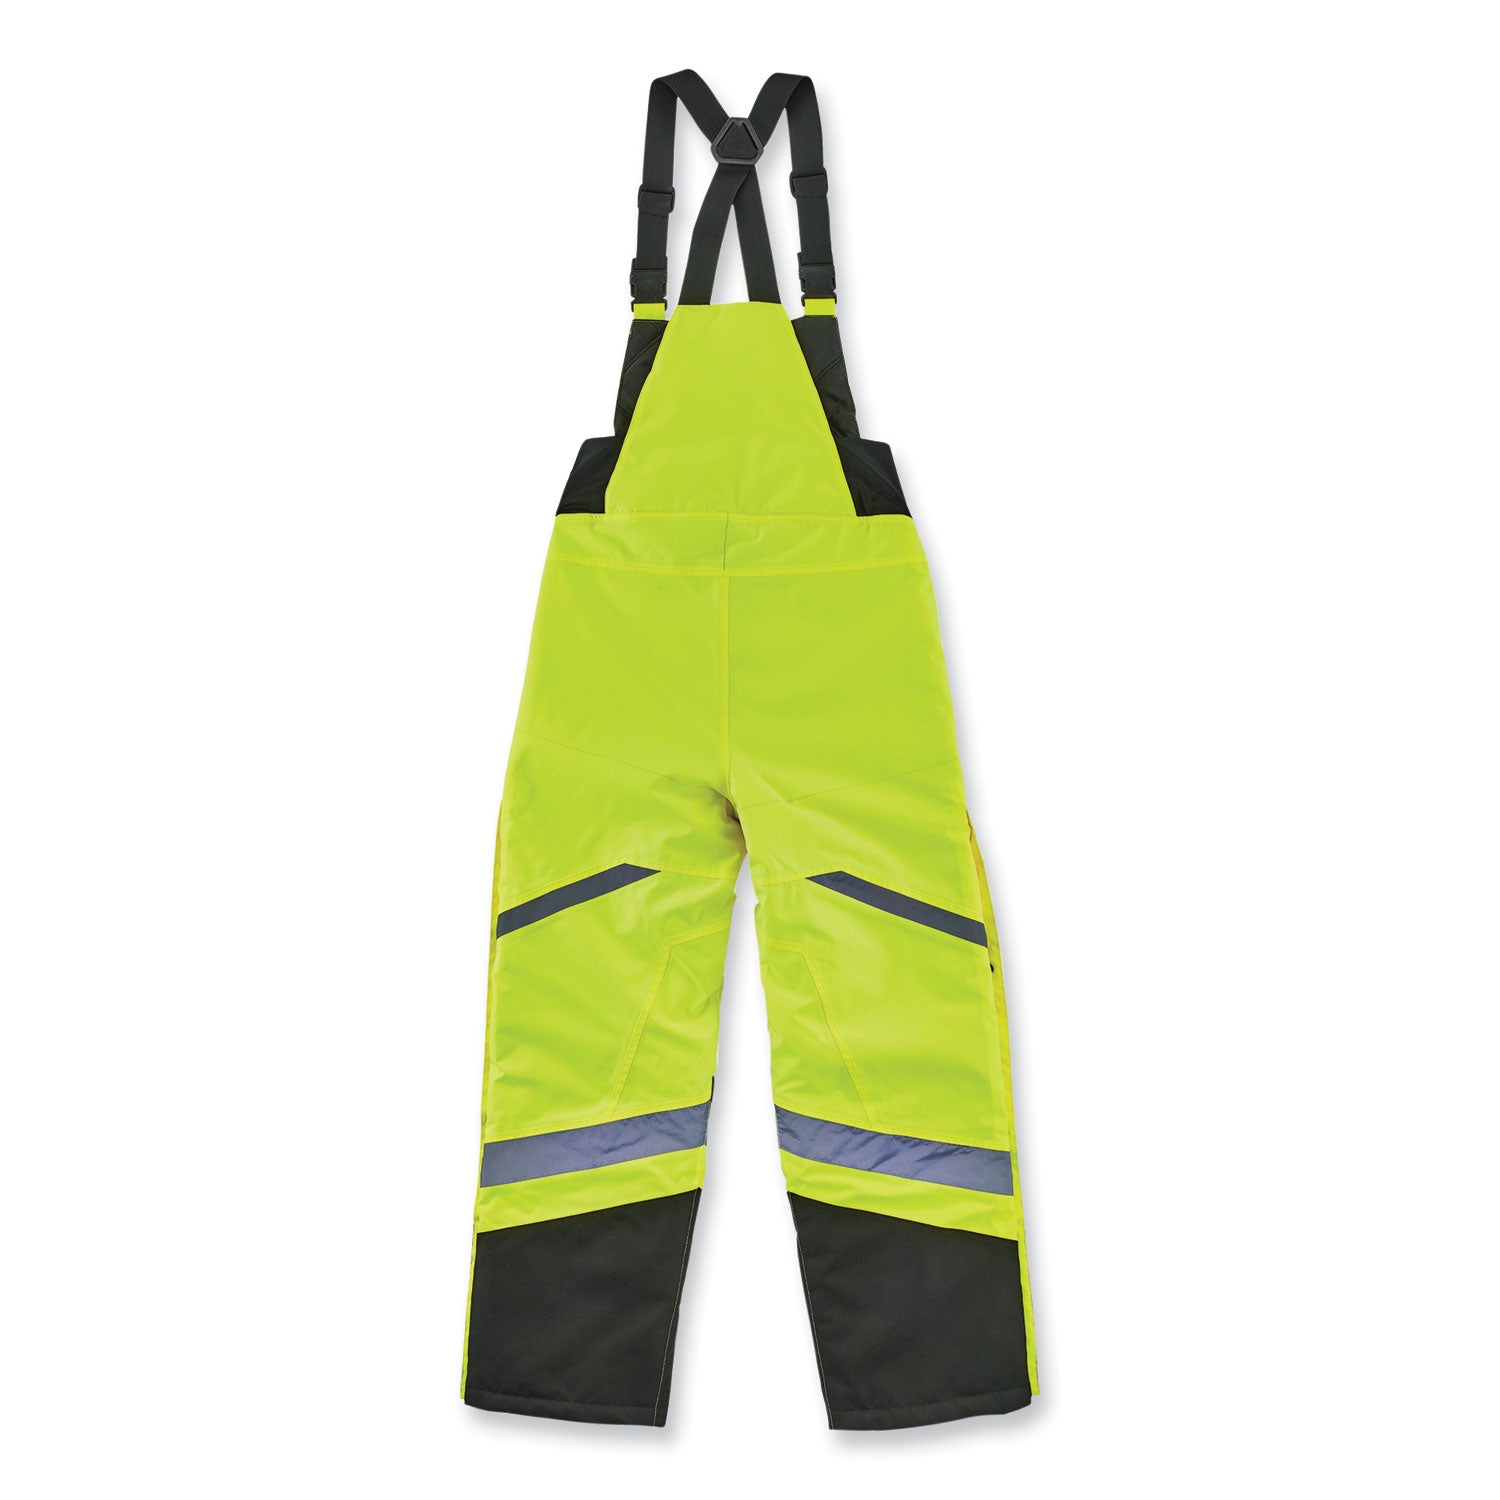 glowear-8928-class-e-hi-vis-insulated-bibs-large-lime-ships-in-1-3-business-days_ego25524 - 2